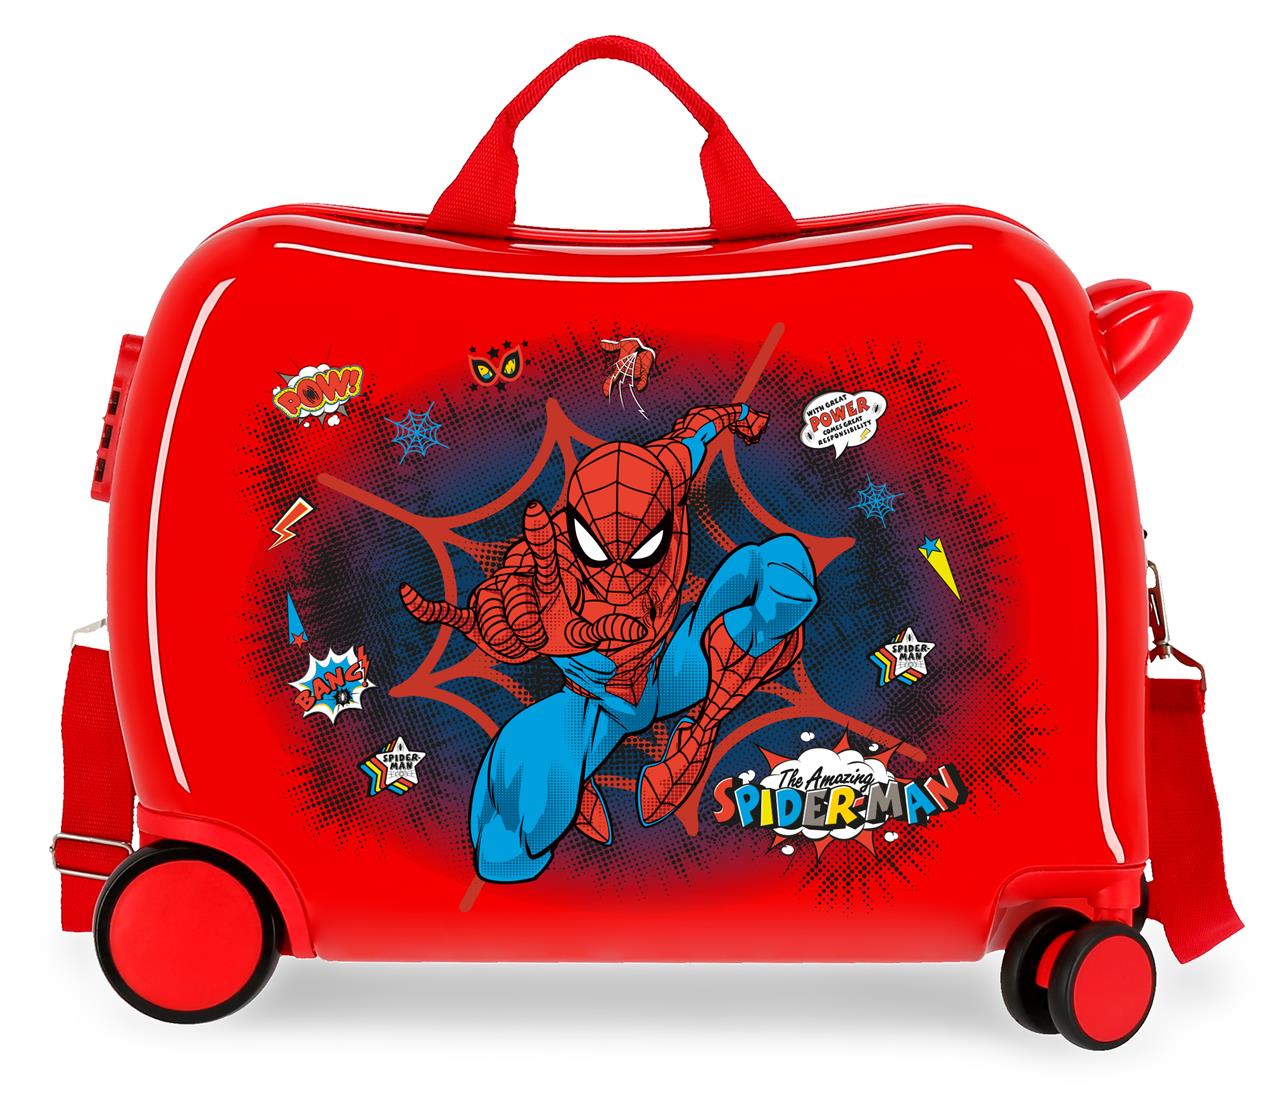 Spiderman Ride on Suitcase Red Kids aged 3-7 –